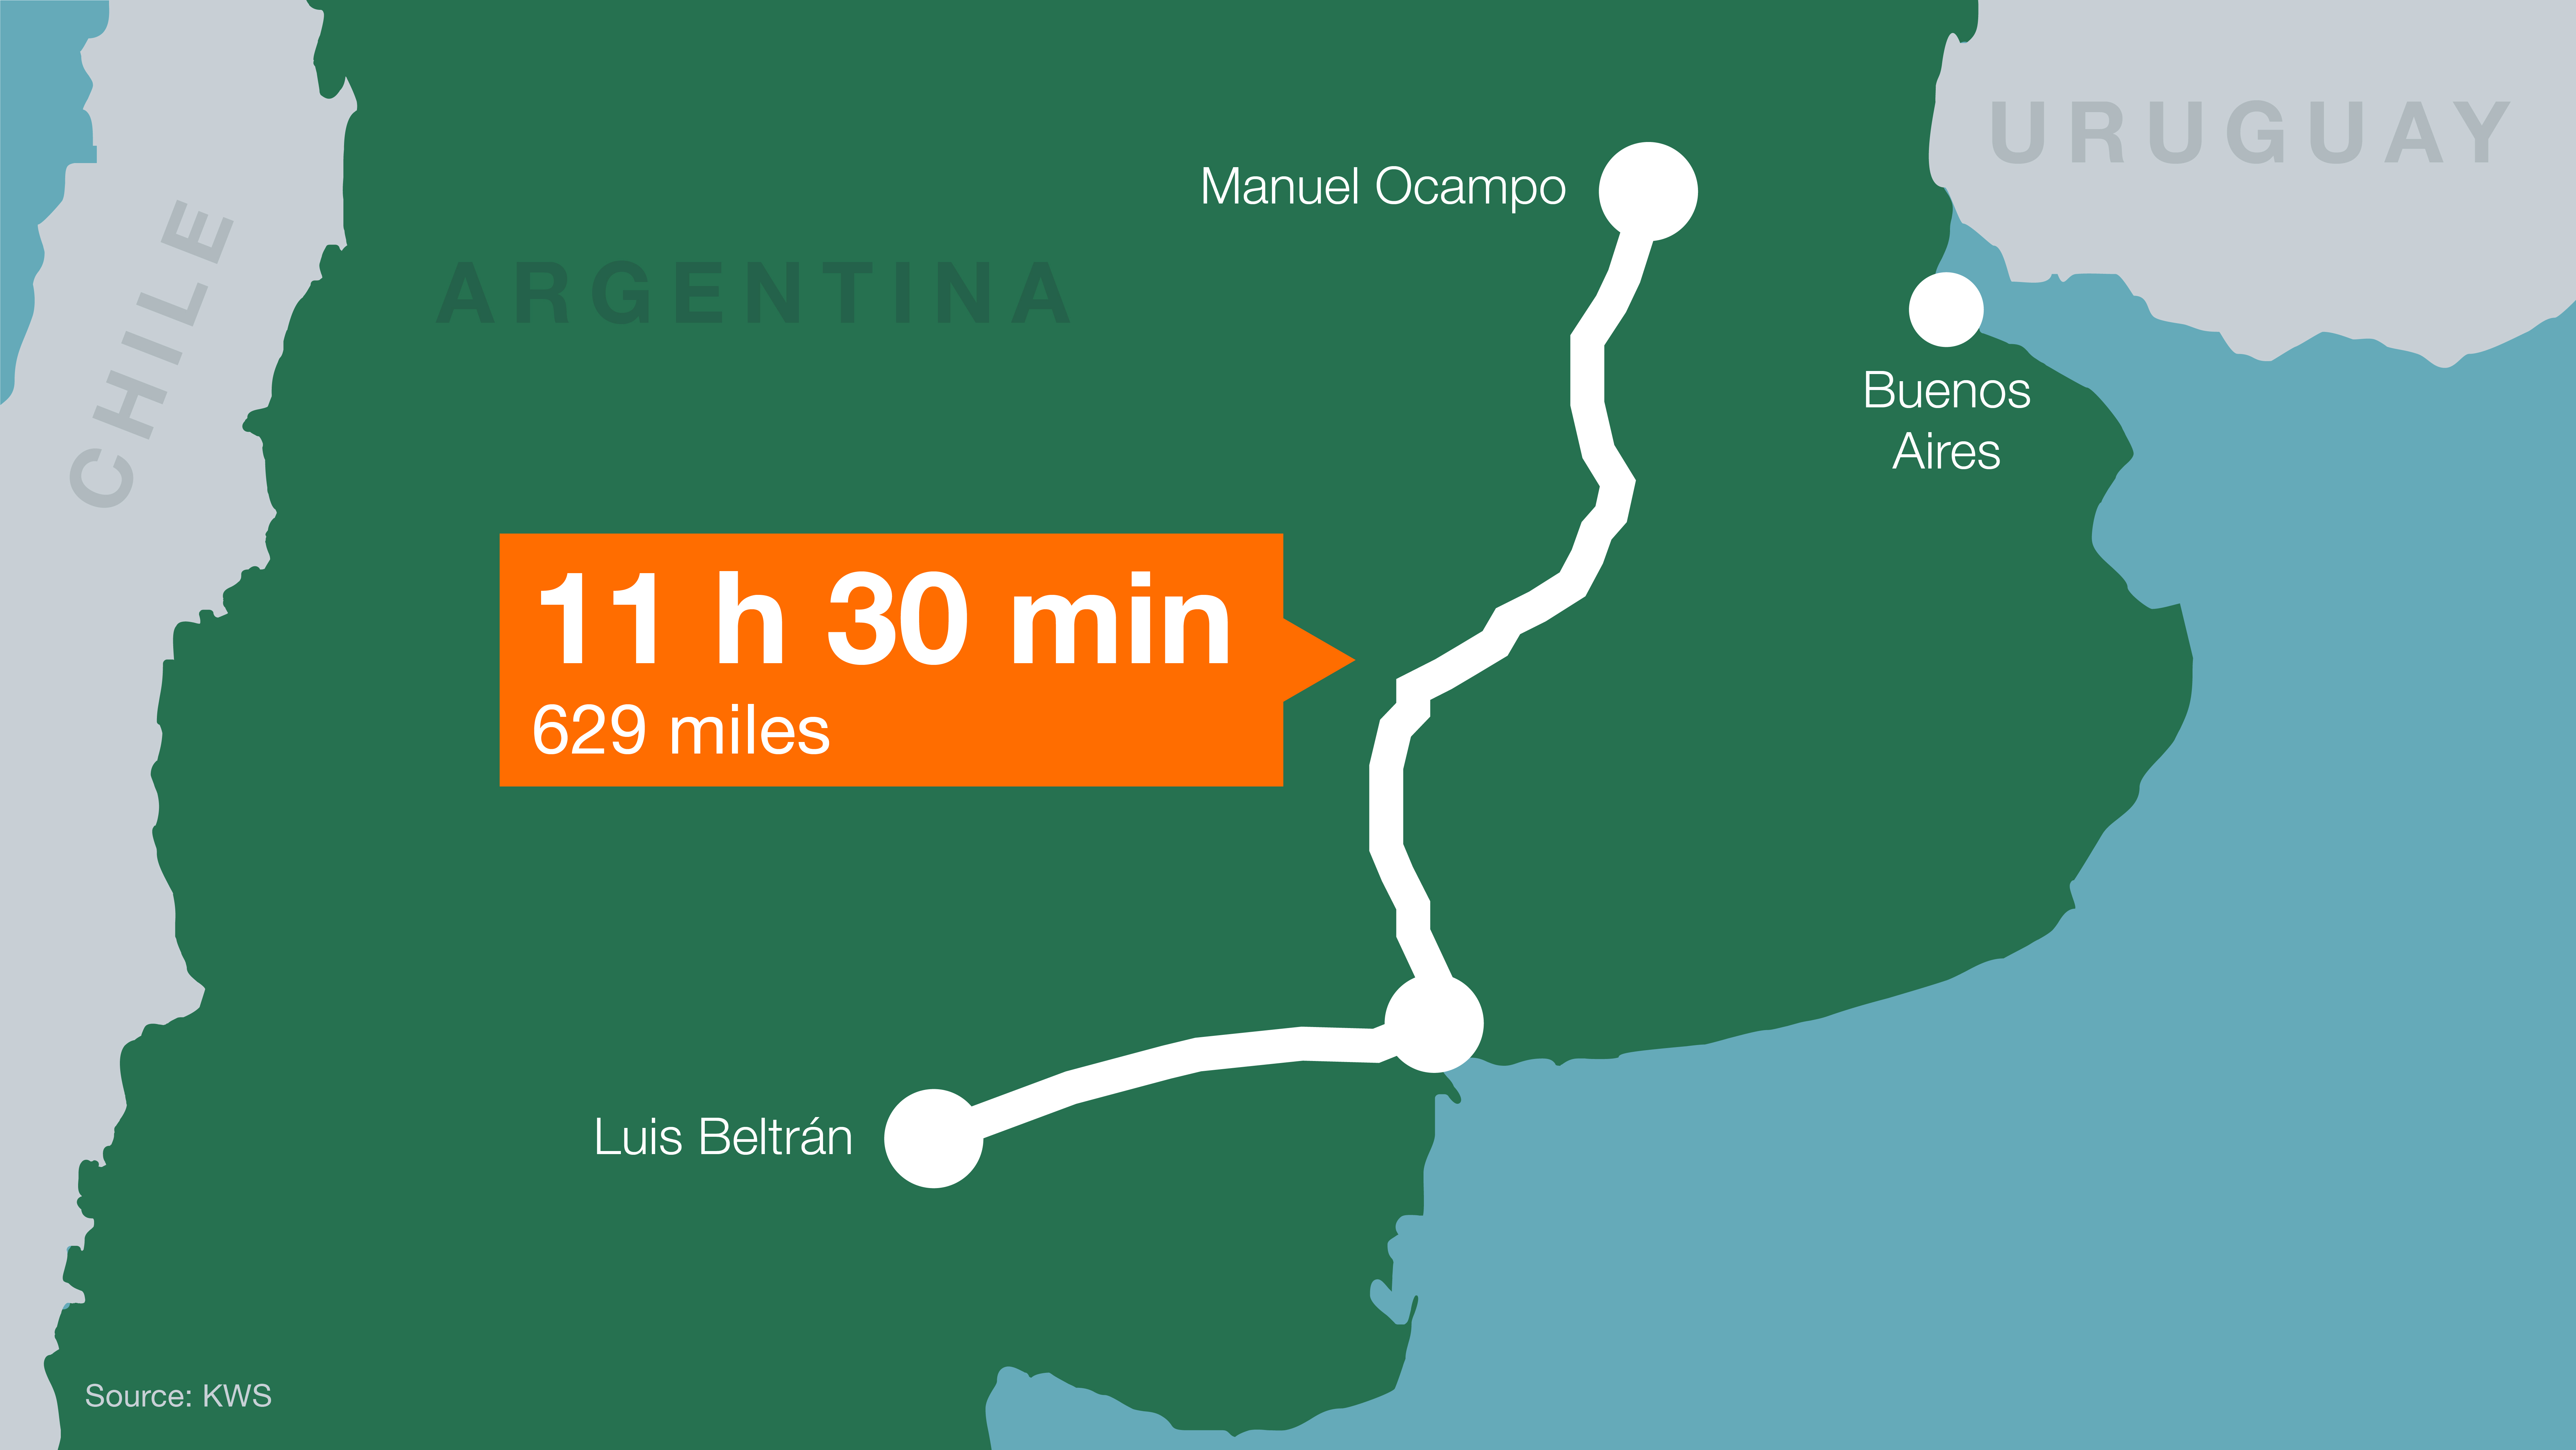 Info graphic: The route leads over 600 miles through Argentina 